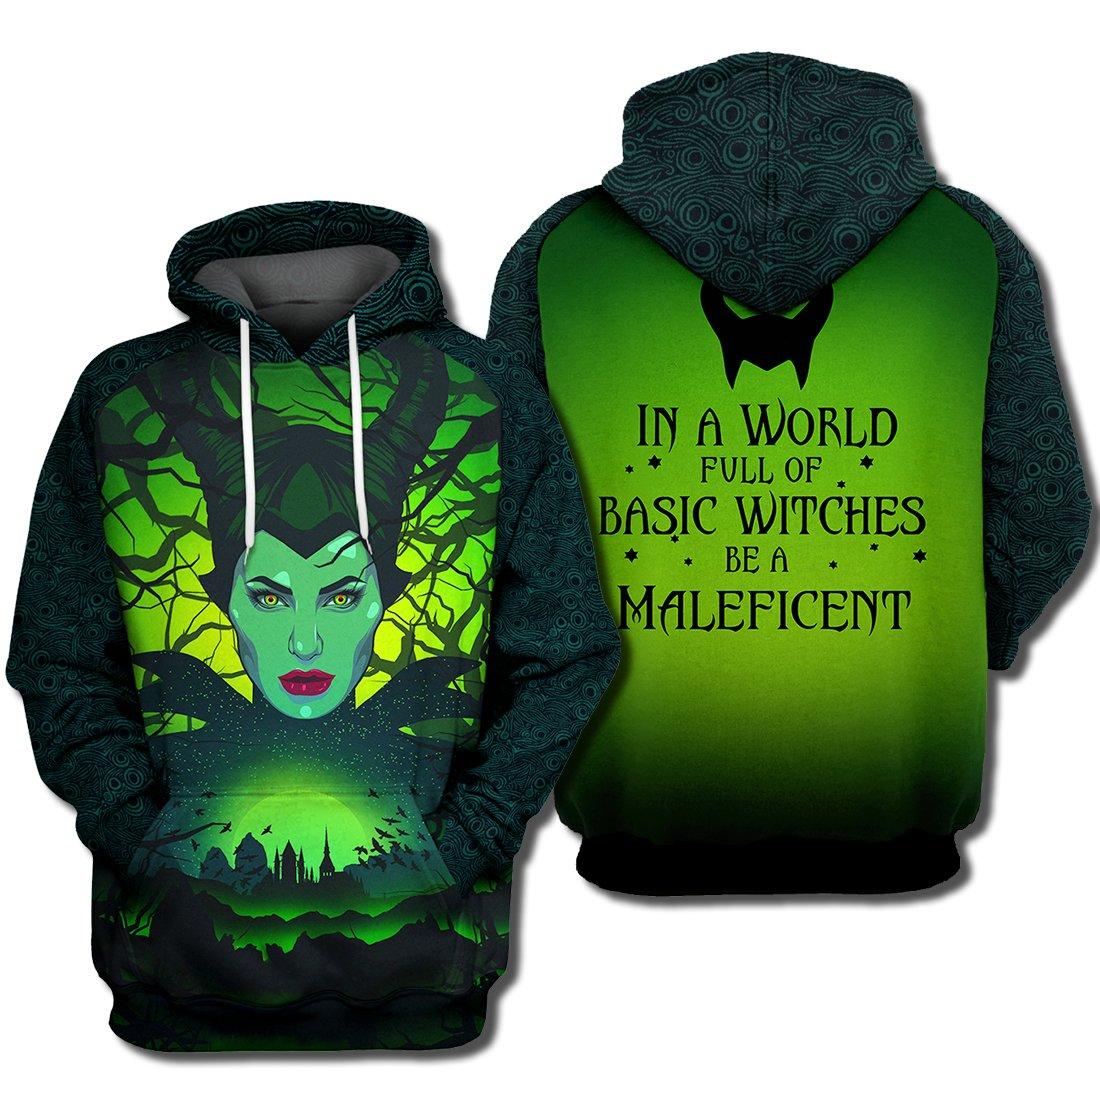 In a world full of basic witches be a maleficent 3d hoodie - maria